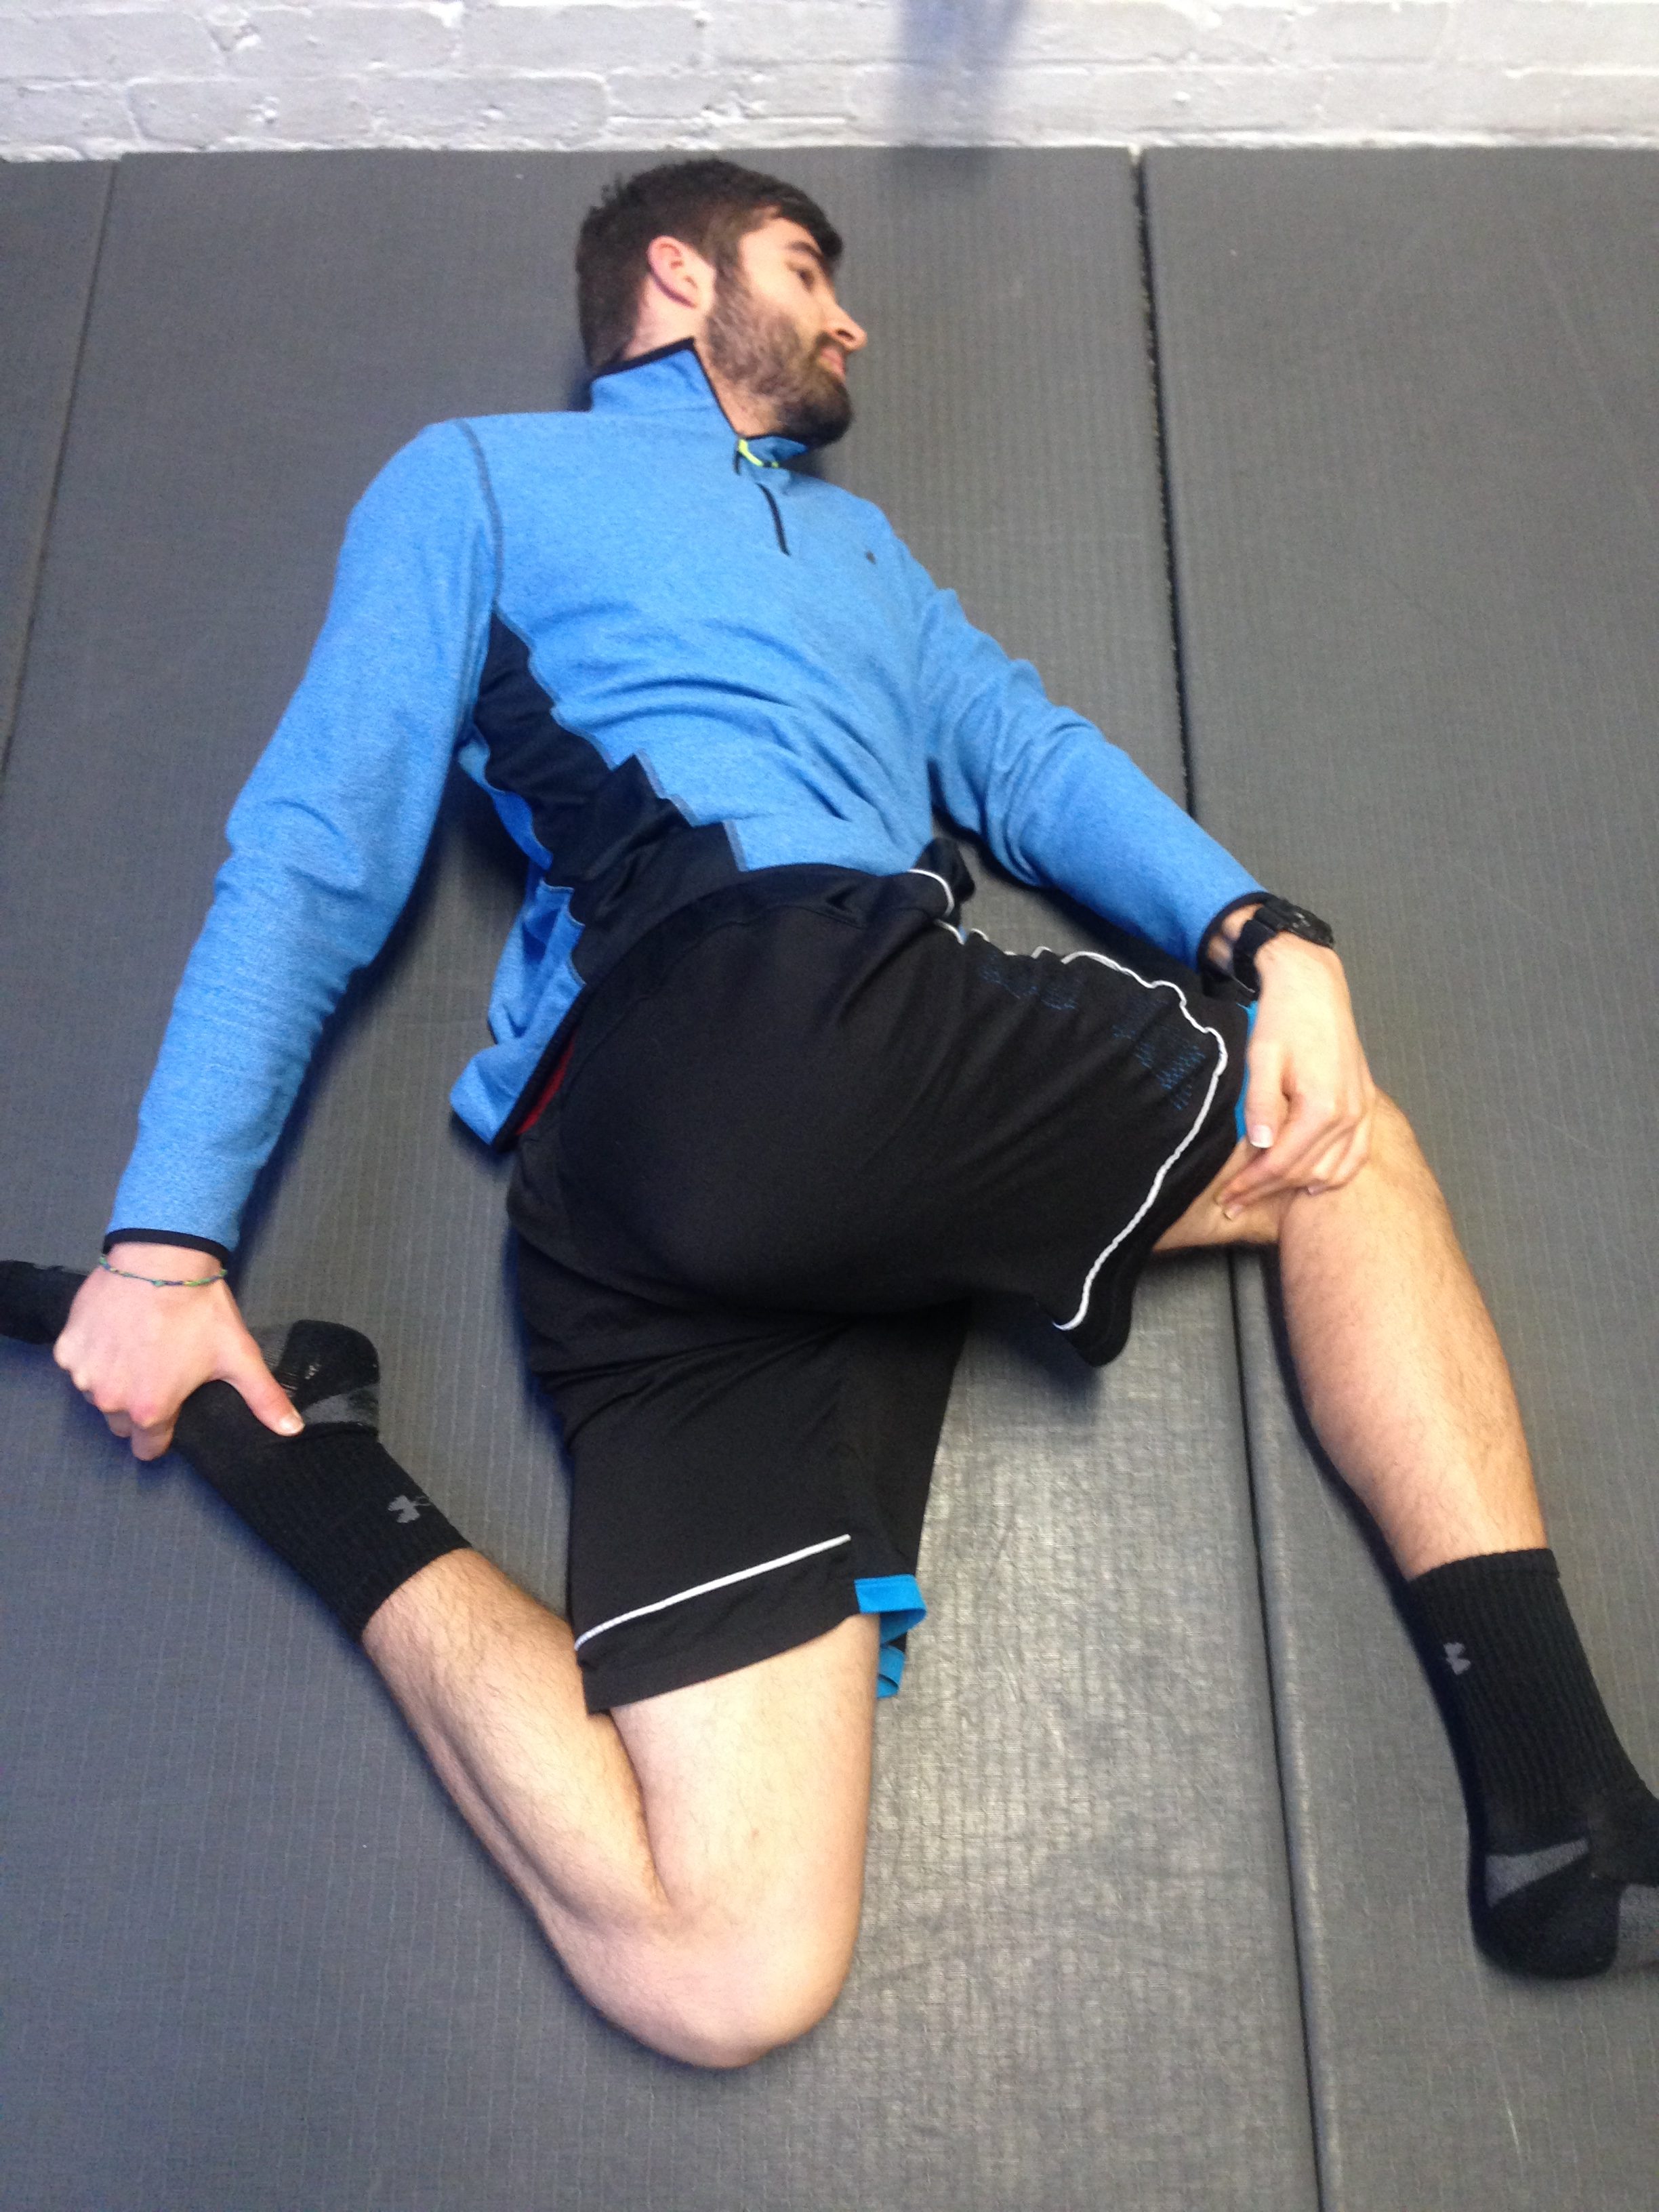 Thoracic spine mobility and health: what can you do daily to improve?